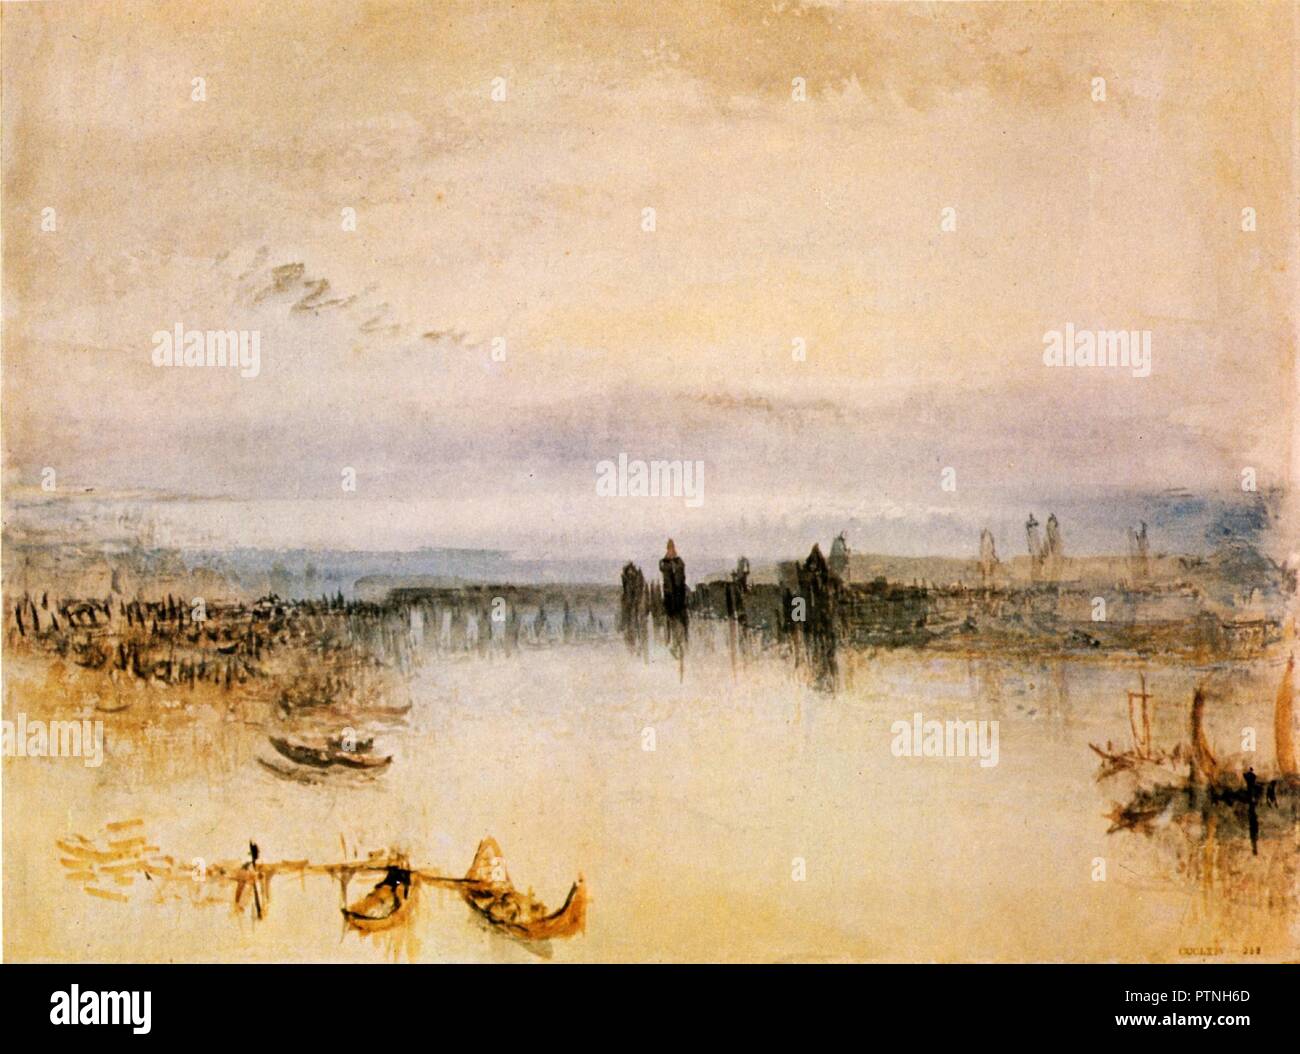 Sketch of the city of Konstanz, 1842. Date/Period: 1842. Watercolor painting. Painting. Author: J. M. W. Turner. TURNER, JOSEPH MALLORD WILLIAM. Stock Photo